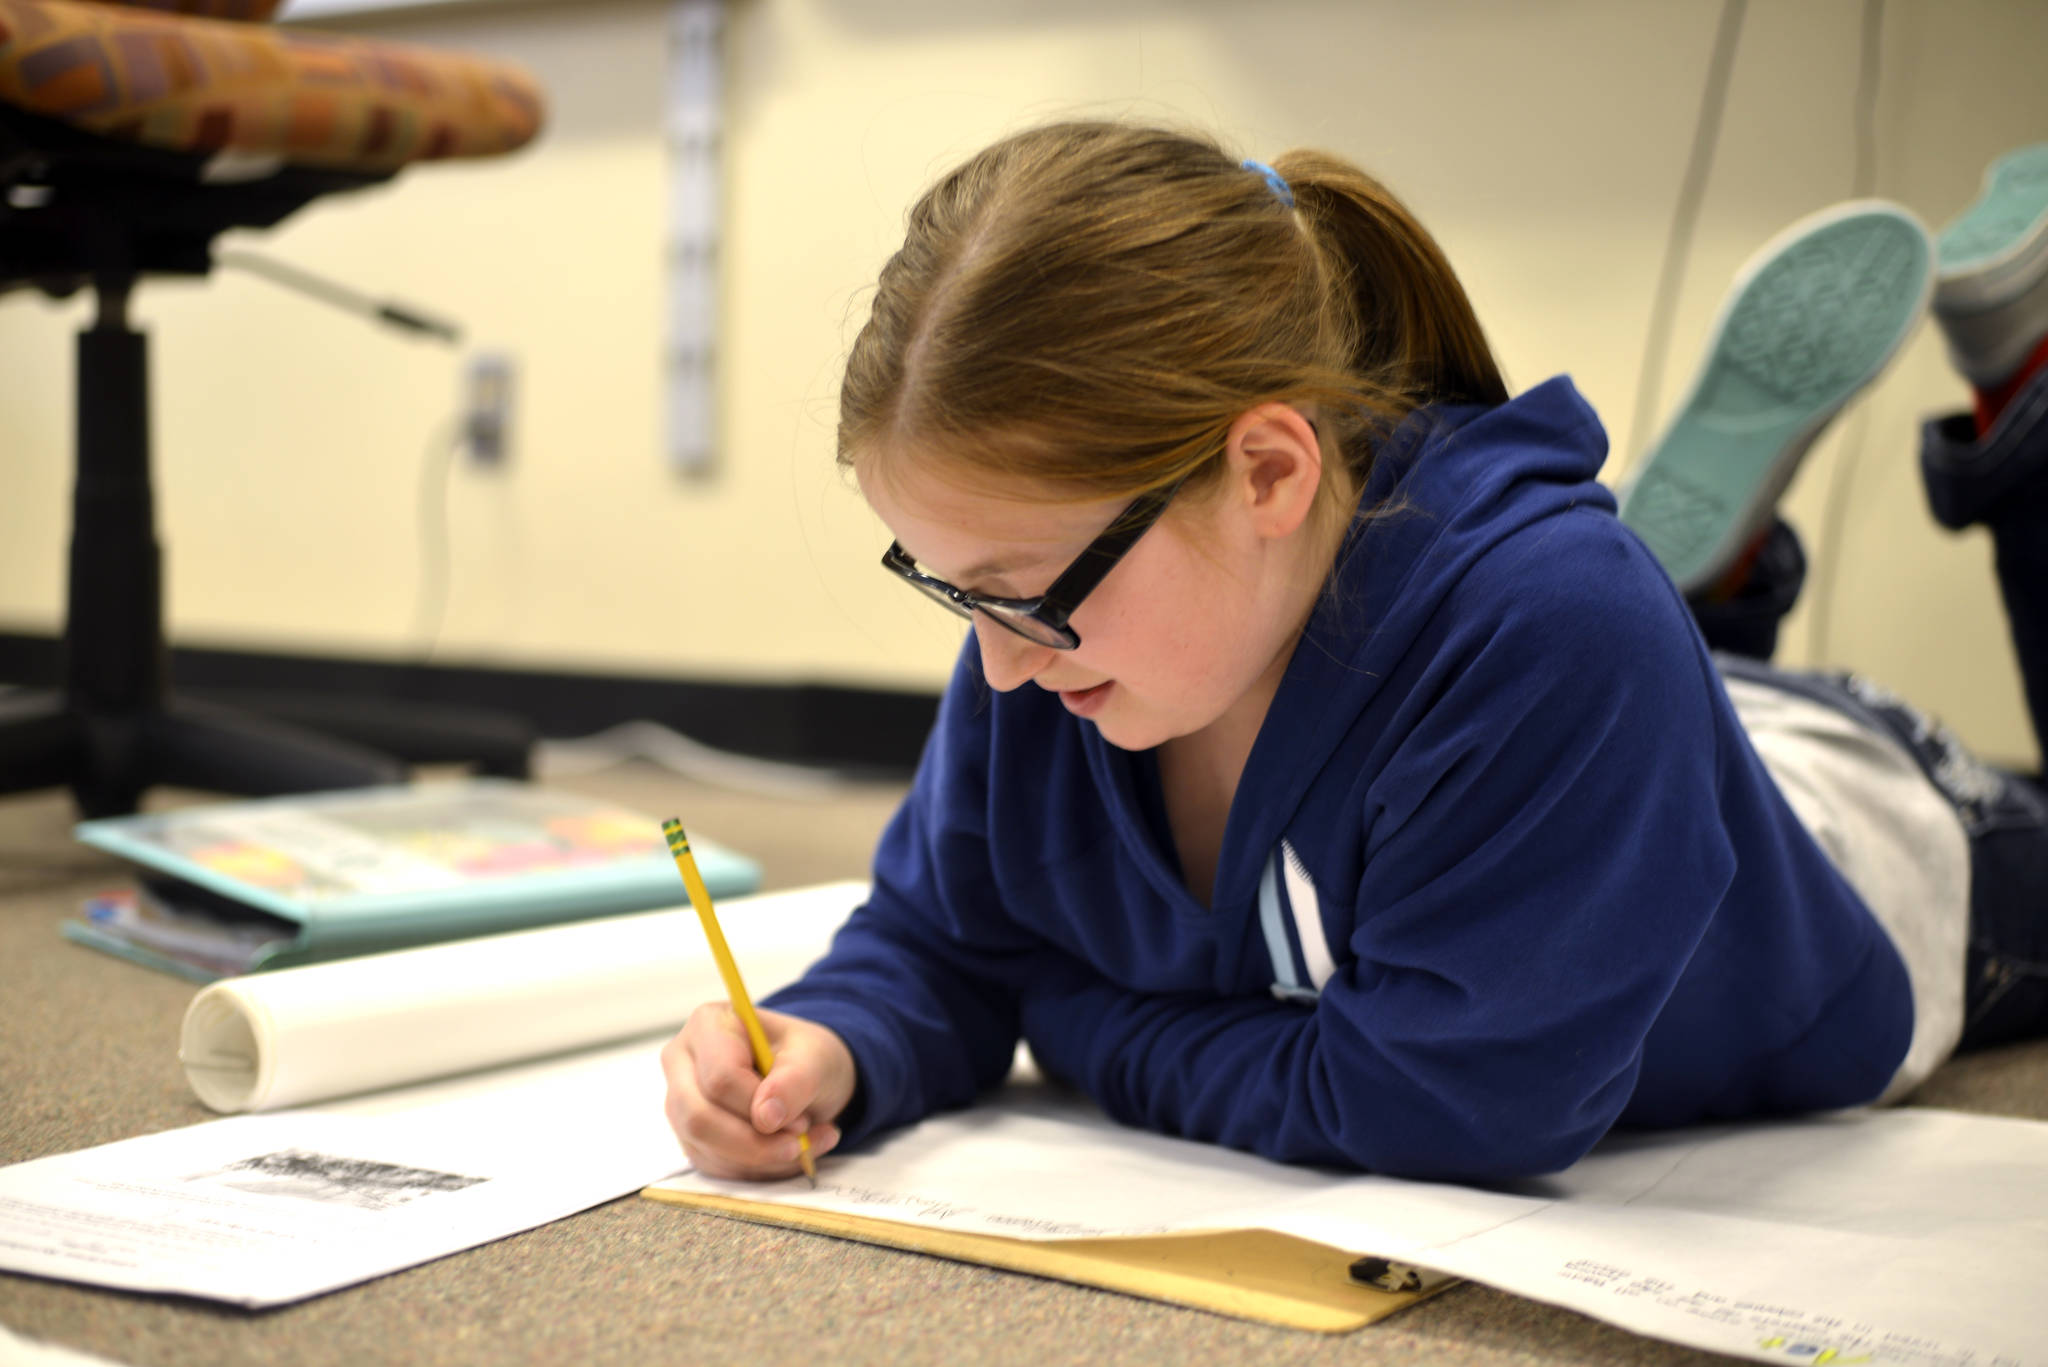 Students in Kristine Barnes’ fifth-grade class at Nikiski North Star Elementary spent their class period drawing a timeline of the American Revolution as part of Nikiski North Star Unplugs, a week without screens and technology. (Photo by Kat Sorensen/Peninsula Clarion)